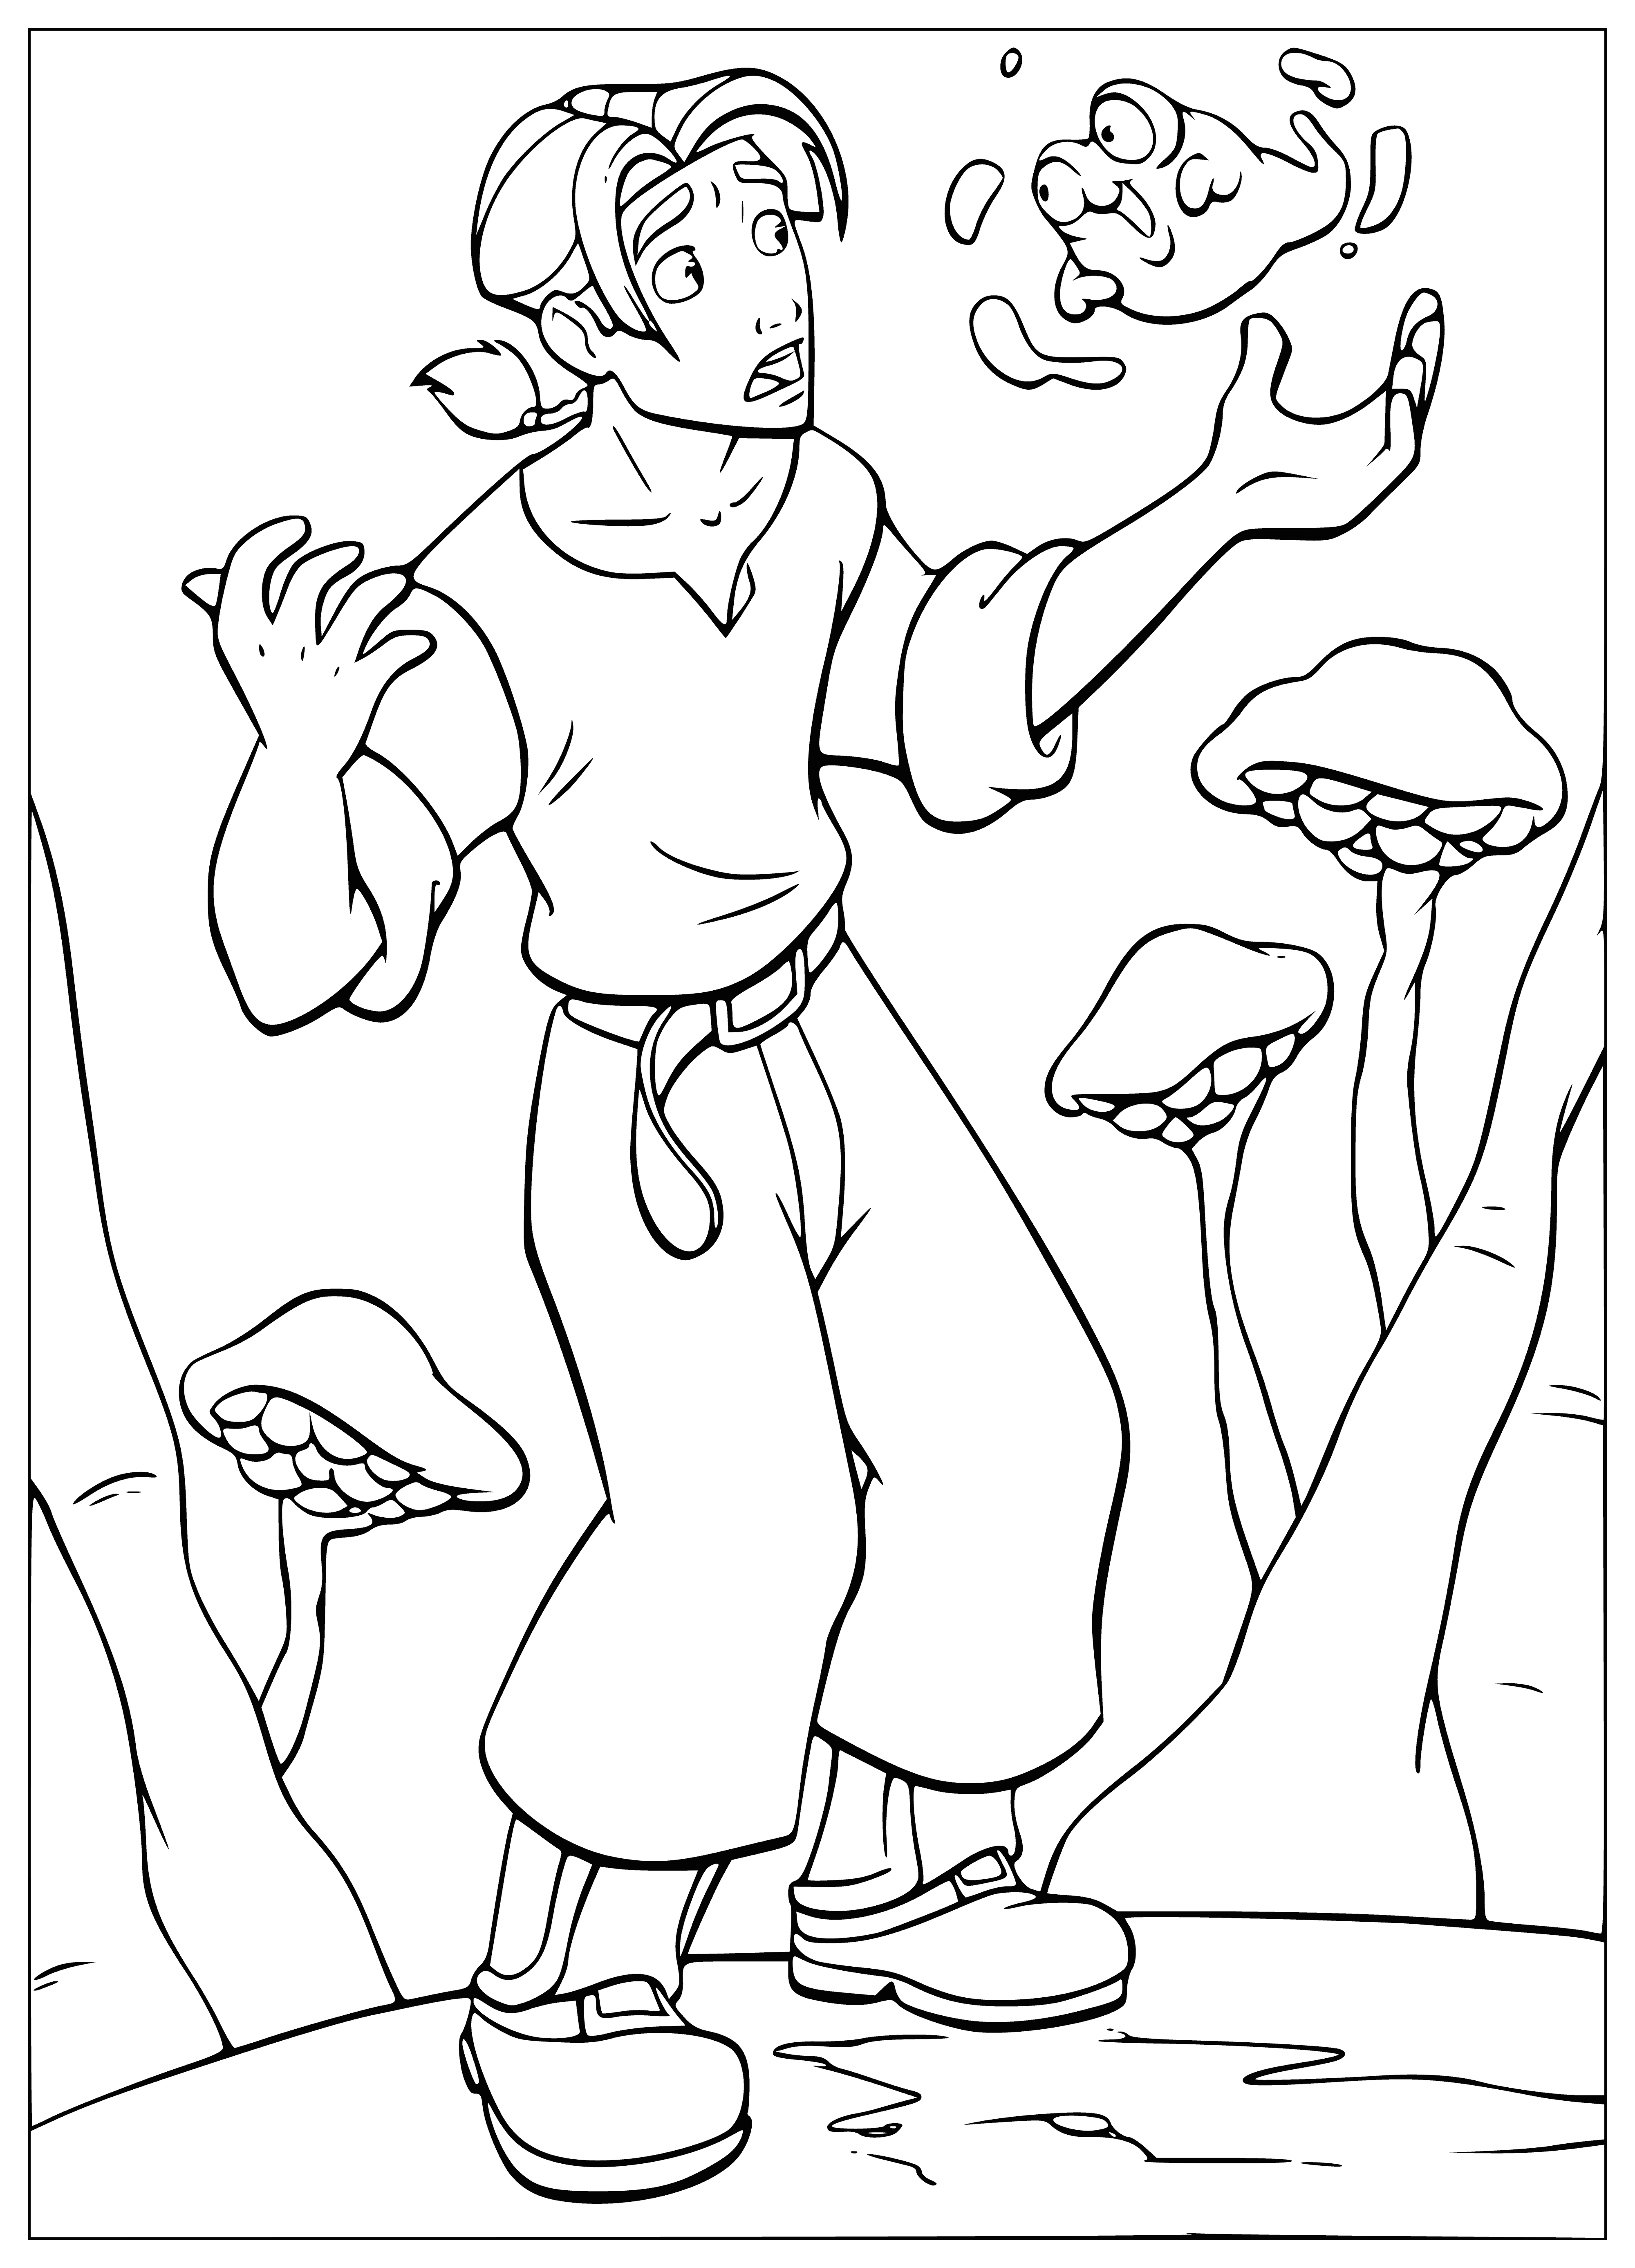 Morph coloring page